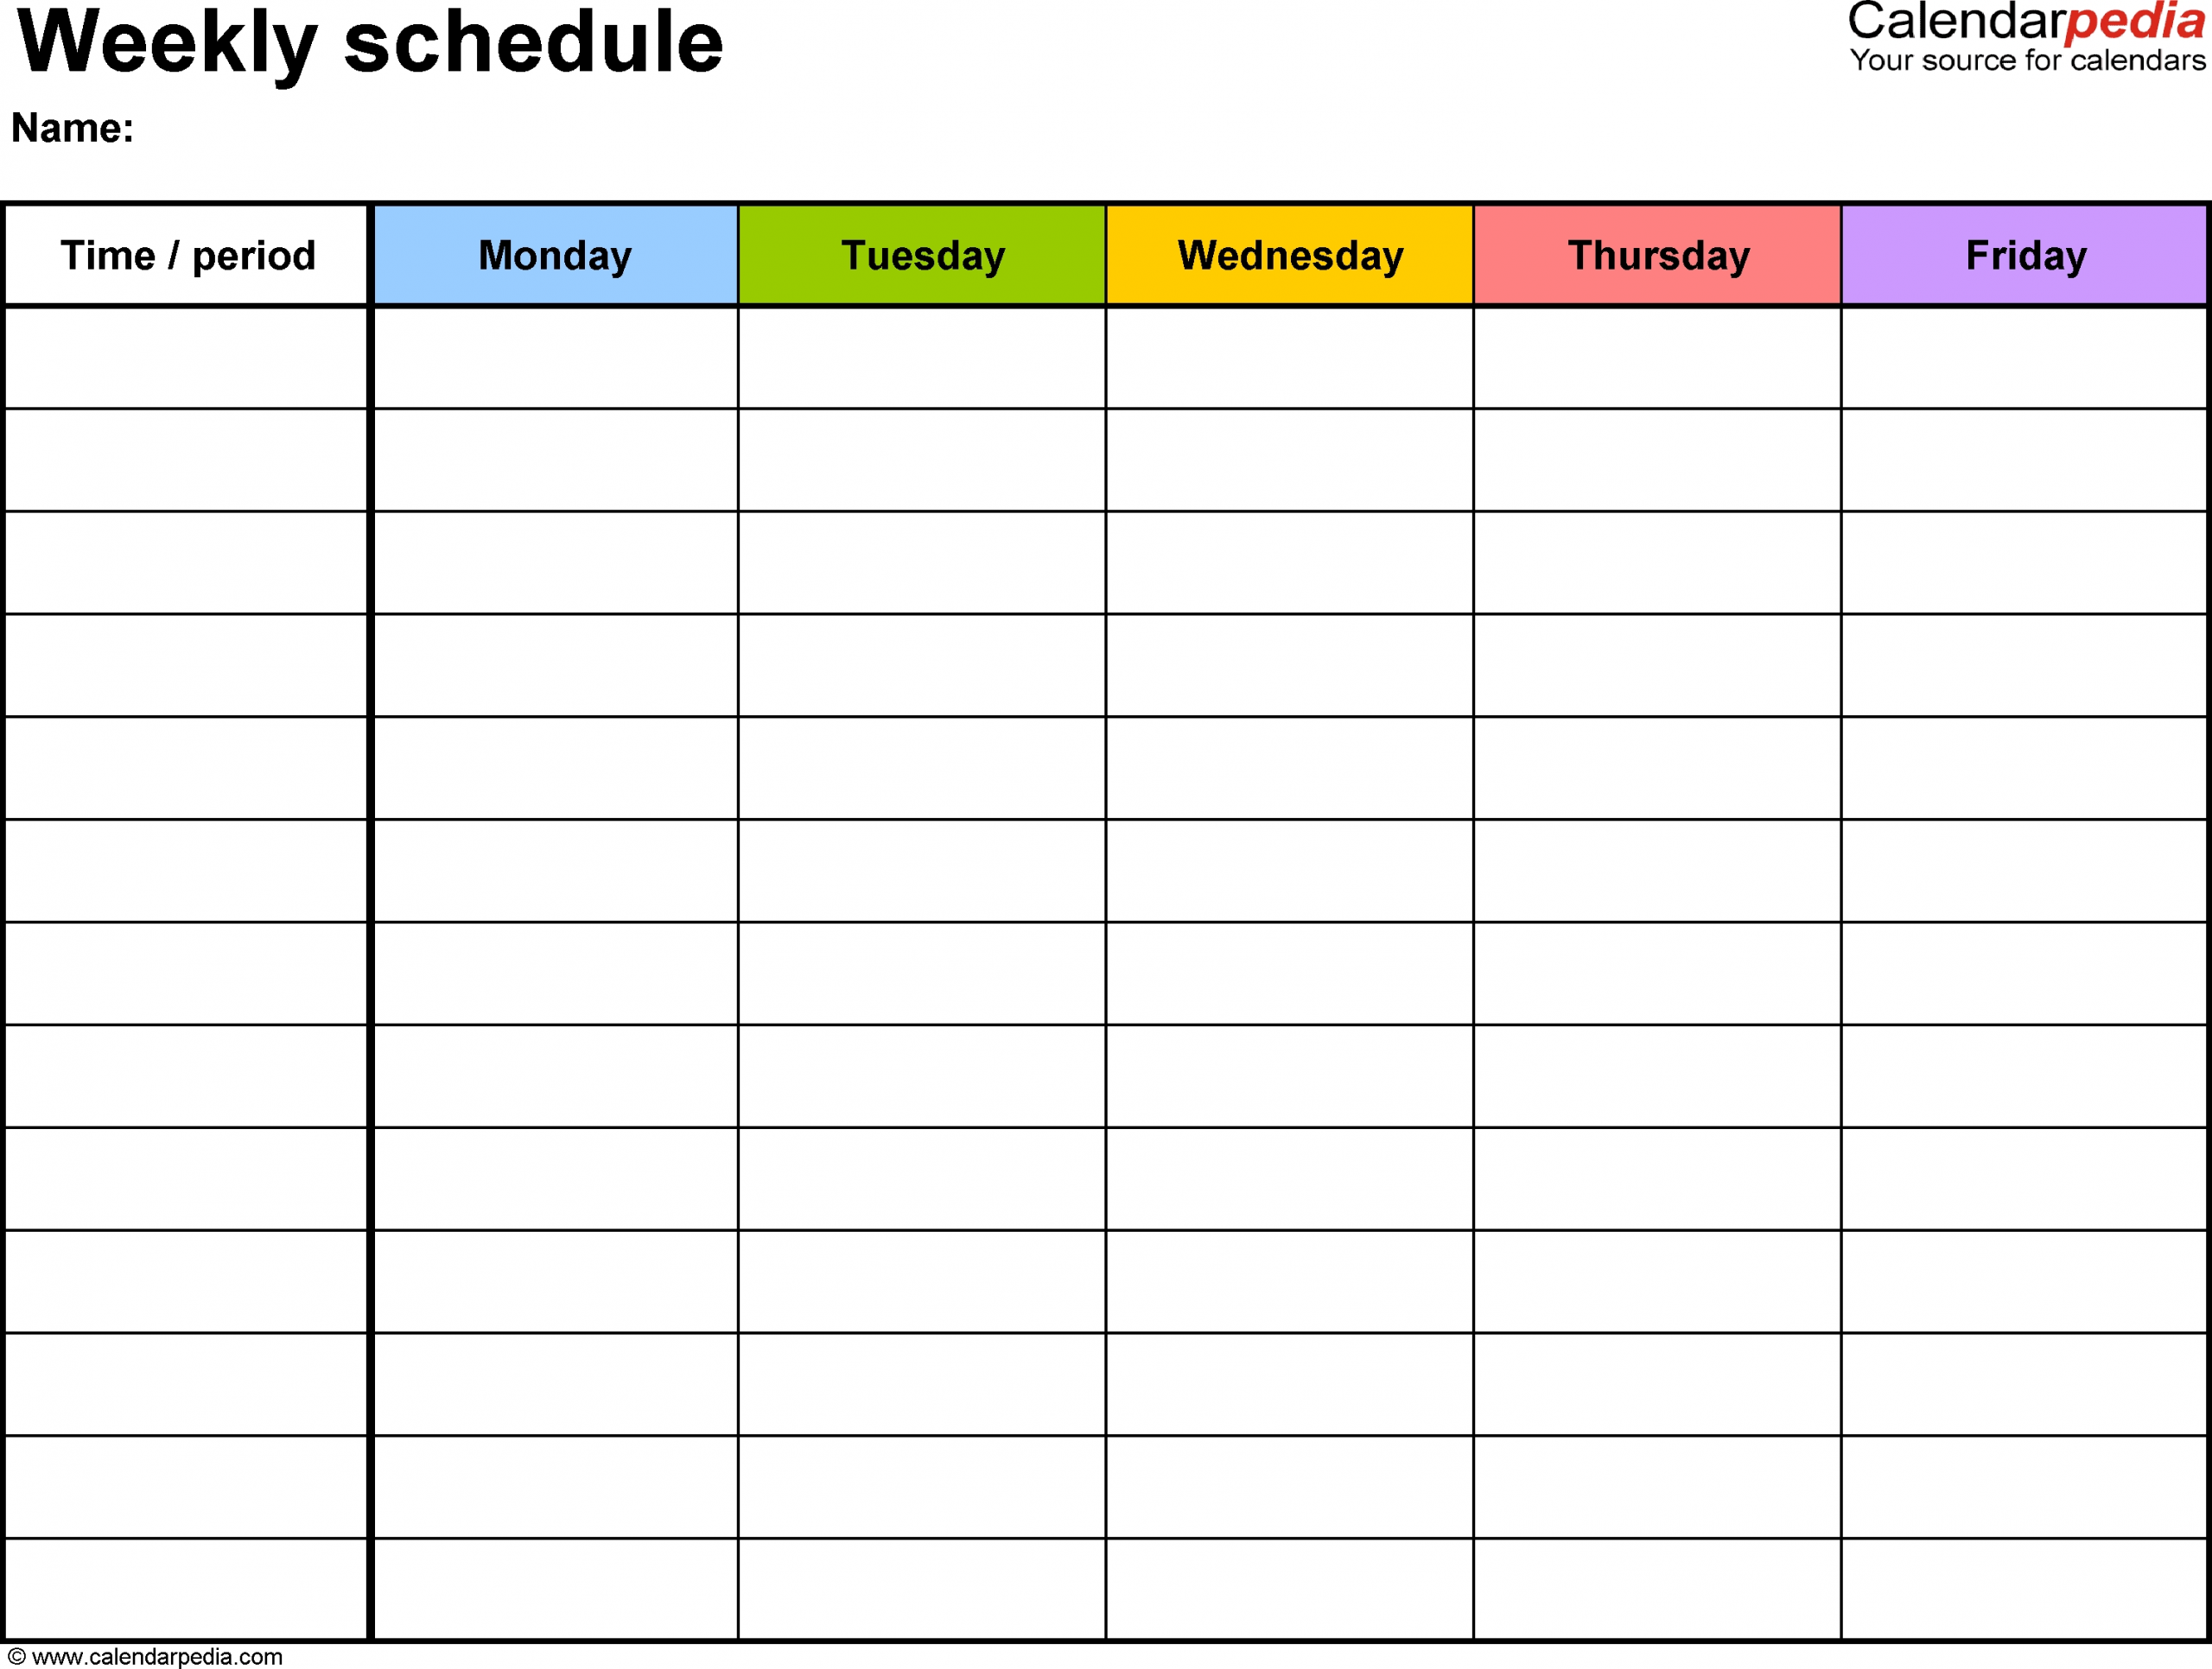 Free Weekly Schedule Templates For Word - 18 Templates pertaining to 7 Day Employee Schedule Template